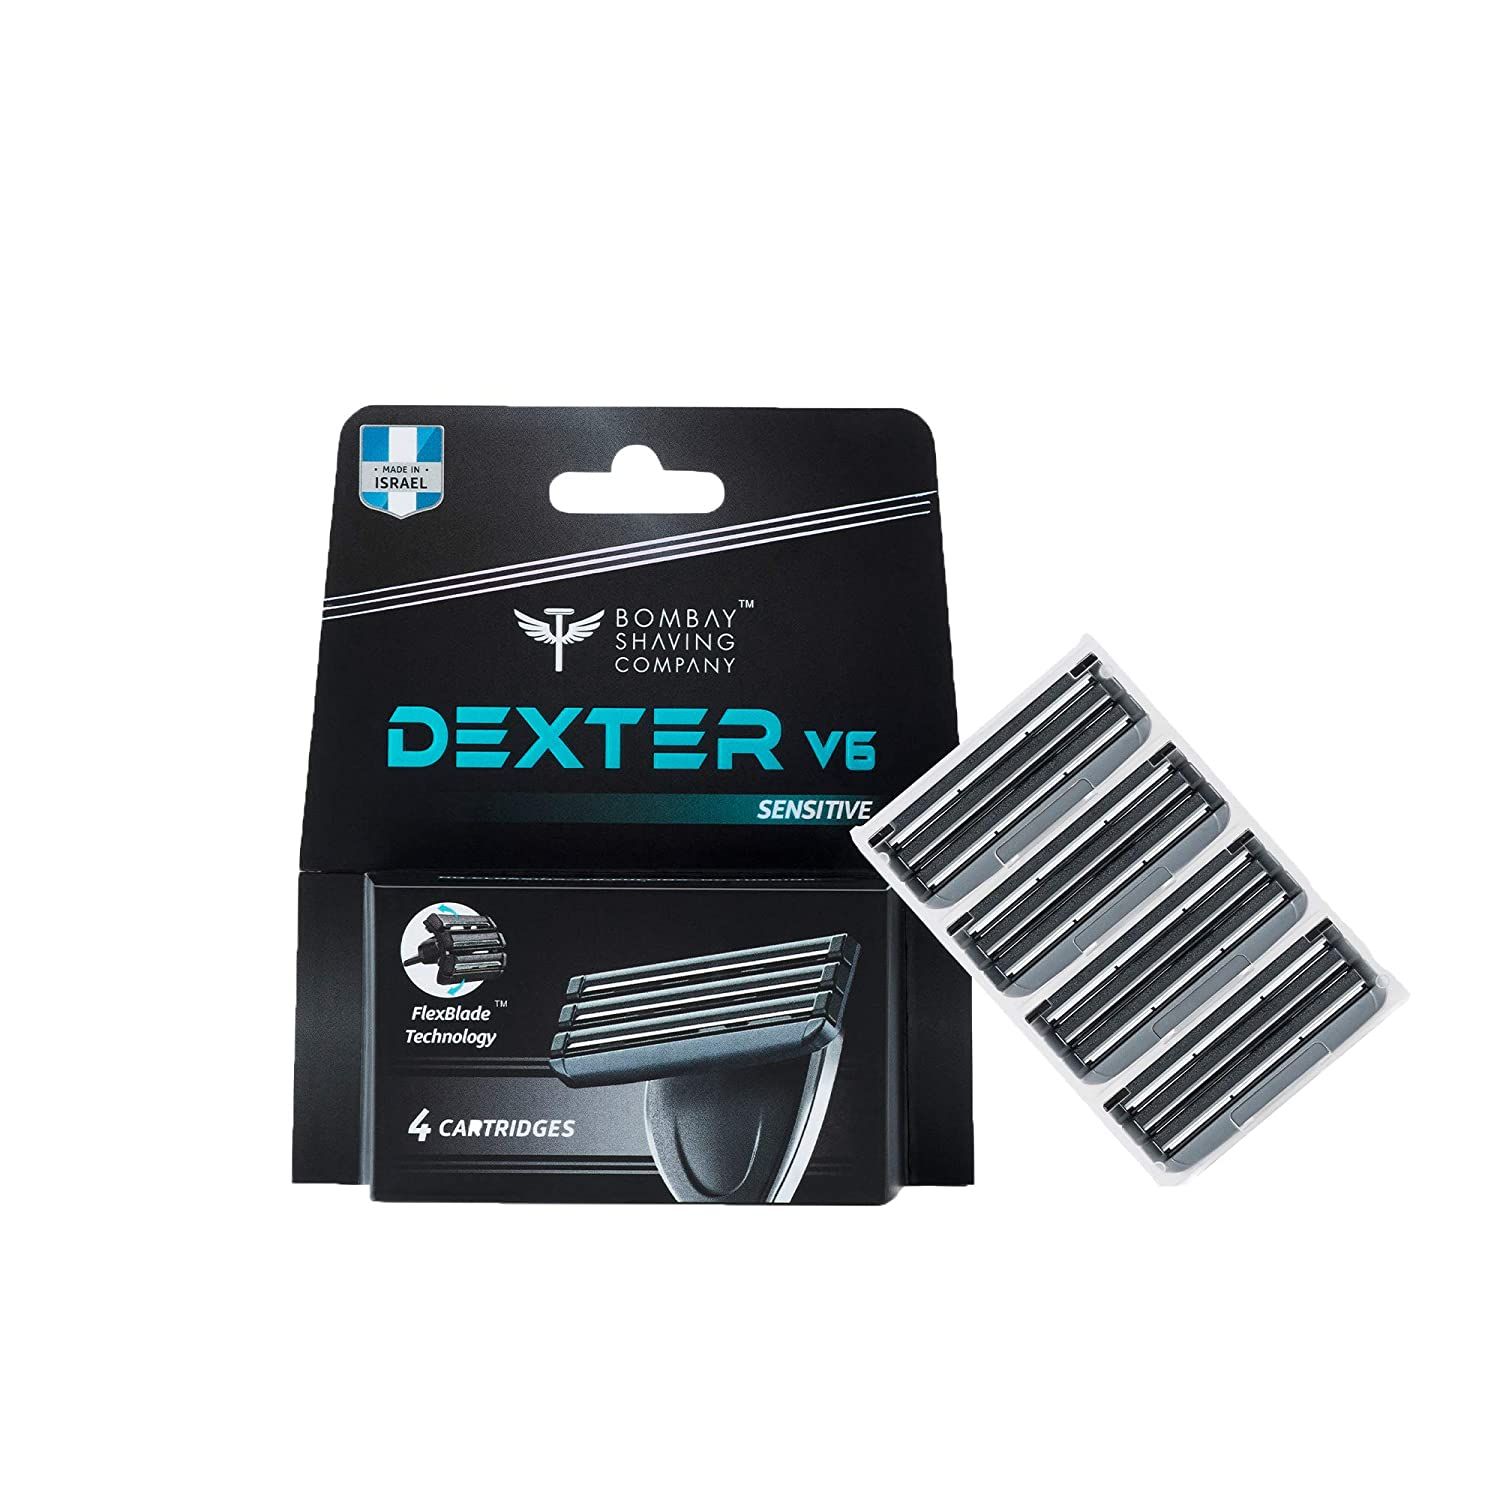 Buy Bombay Shaving Company Dexter V6 Sensitive Cartridges with FlexBlade Technology (Pack of 4) 200 gm - Purplle